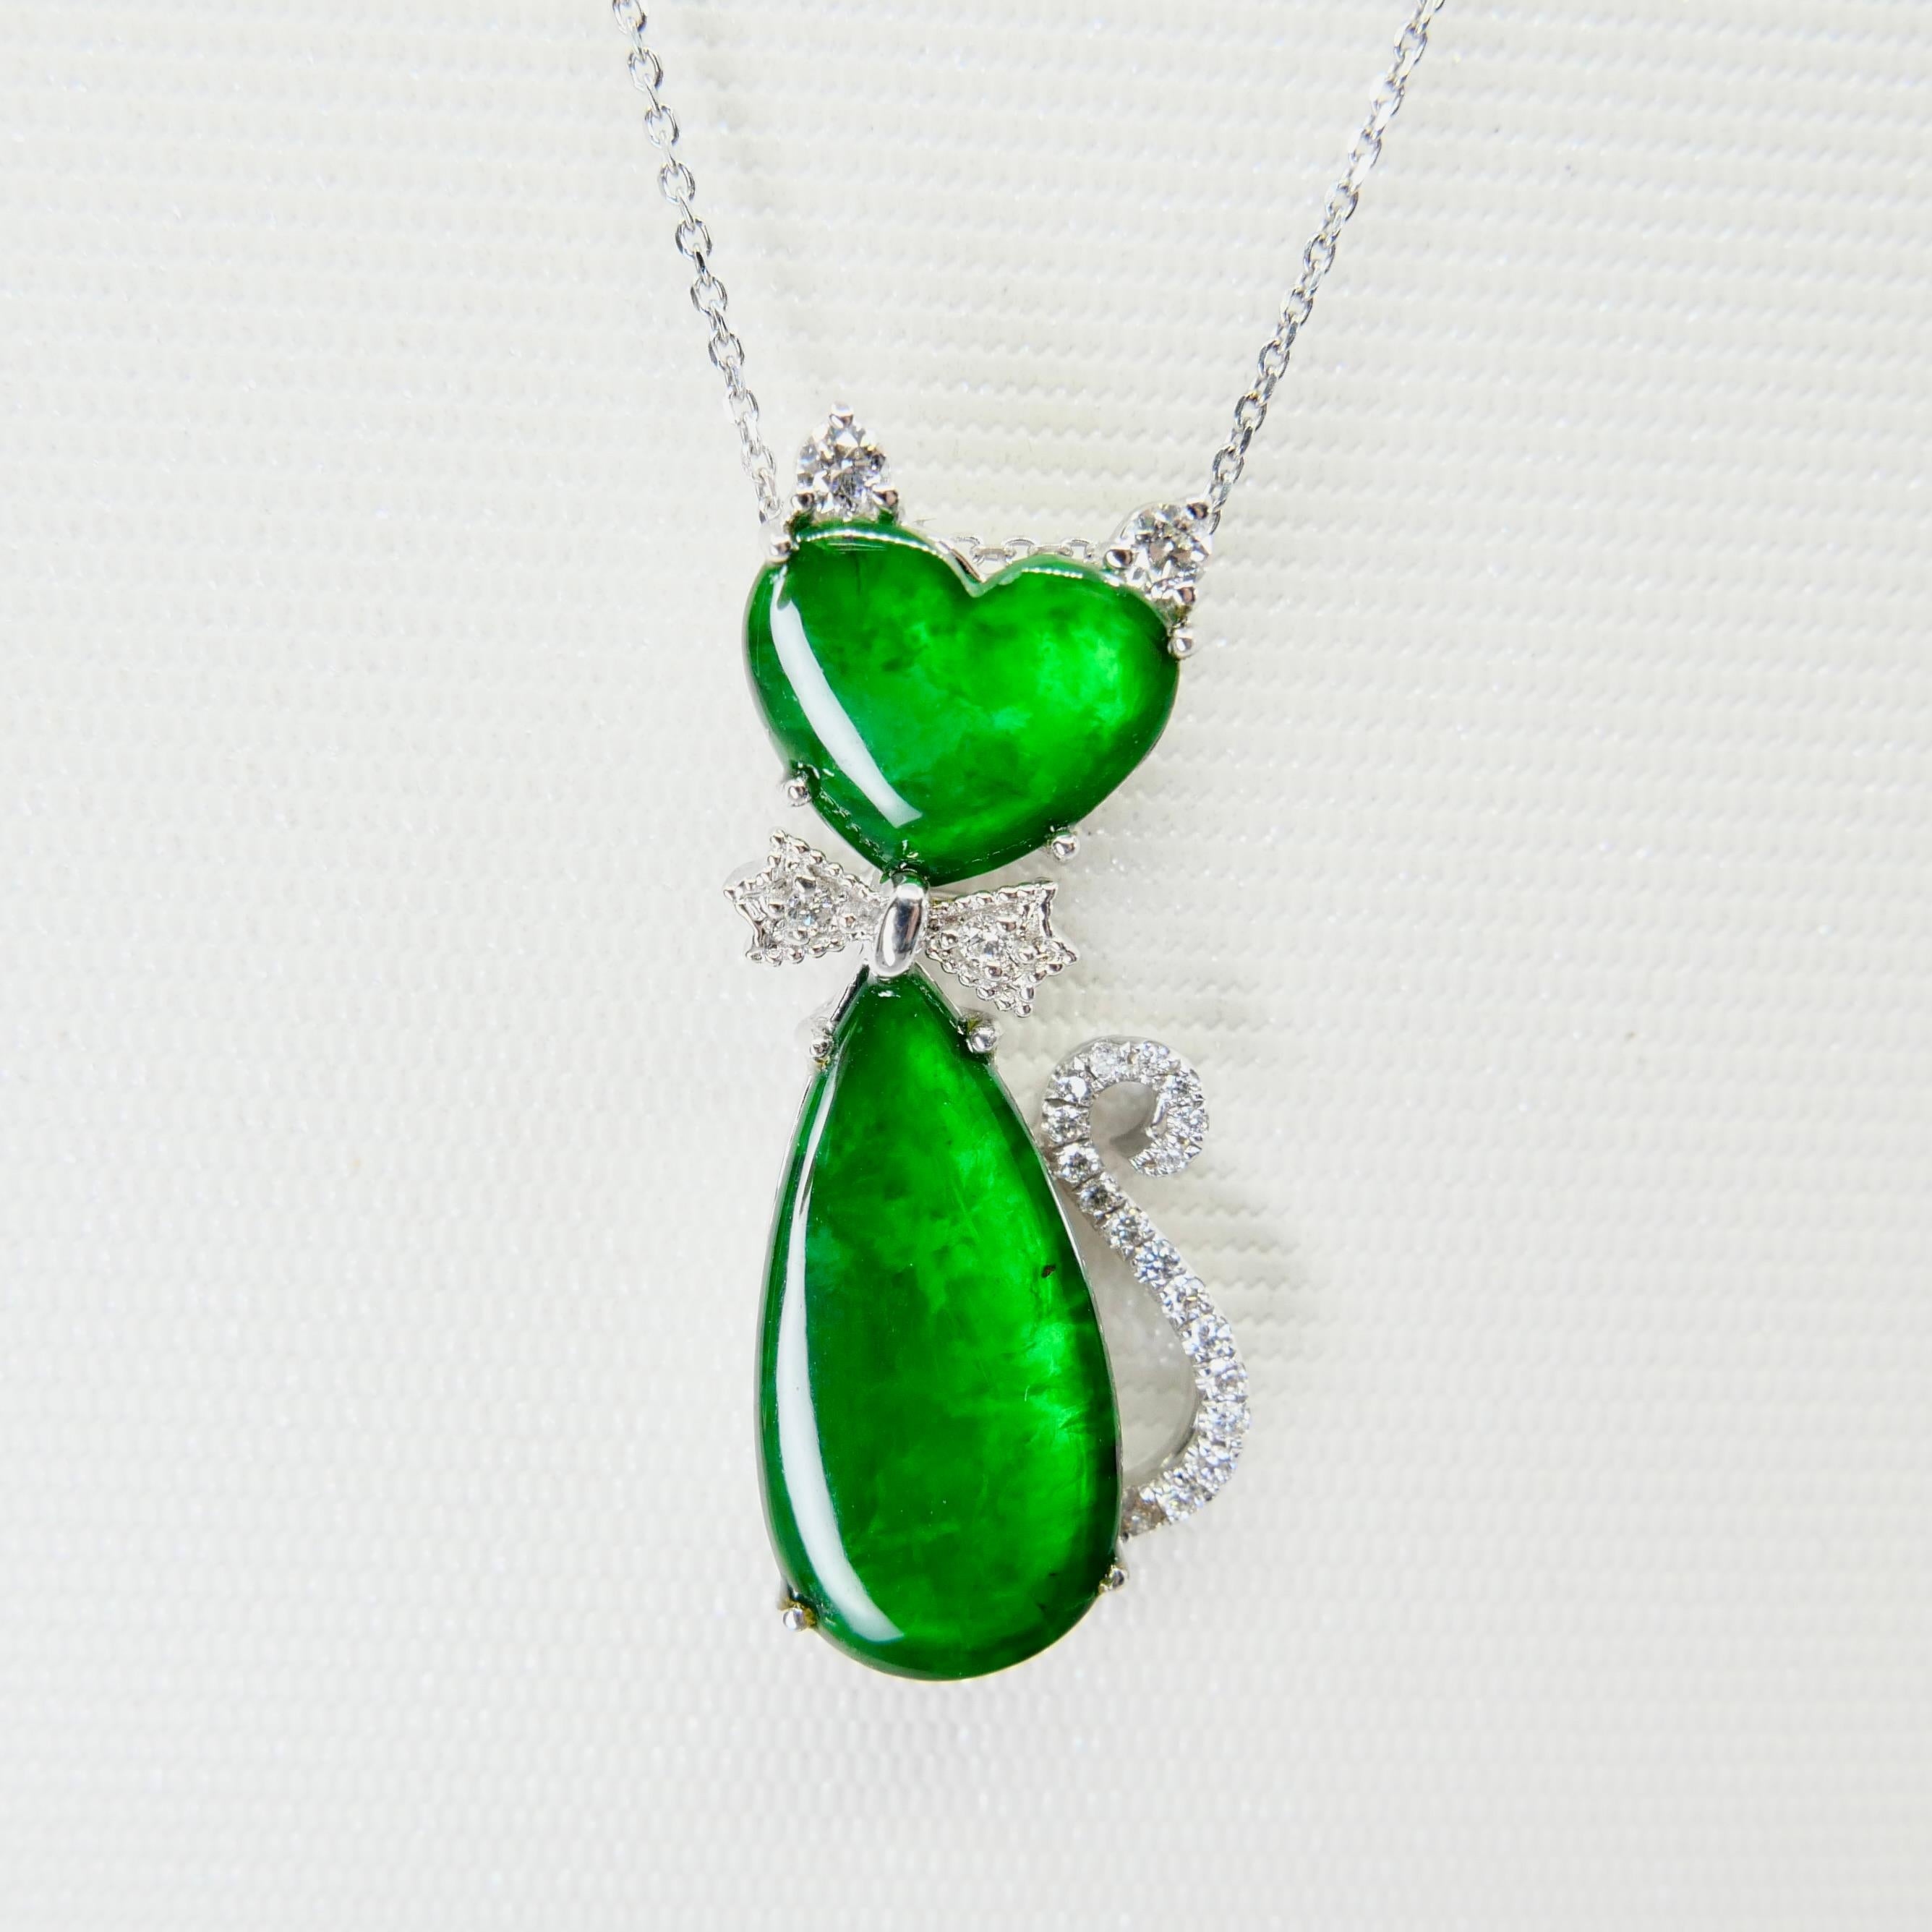 Heart Cut Certified Natural Jade & Diamond Cat Pendant Necklace Glowing Apple Green Color For Sale